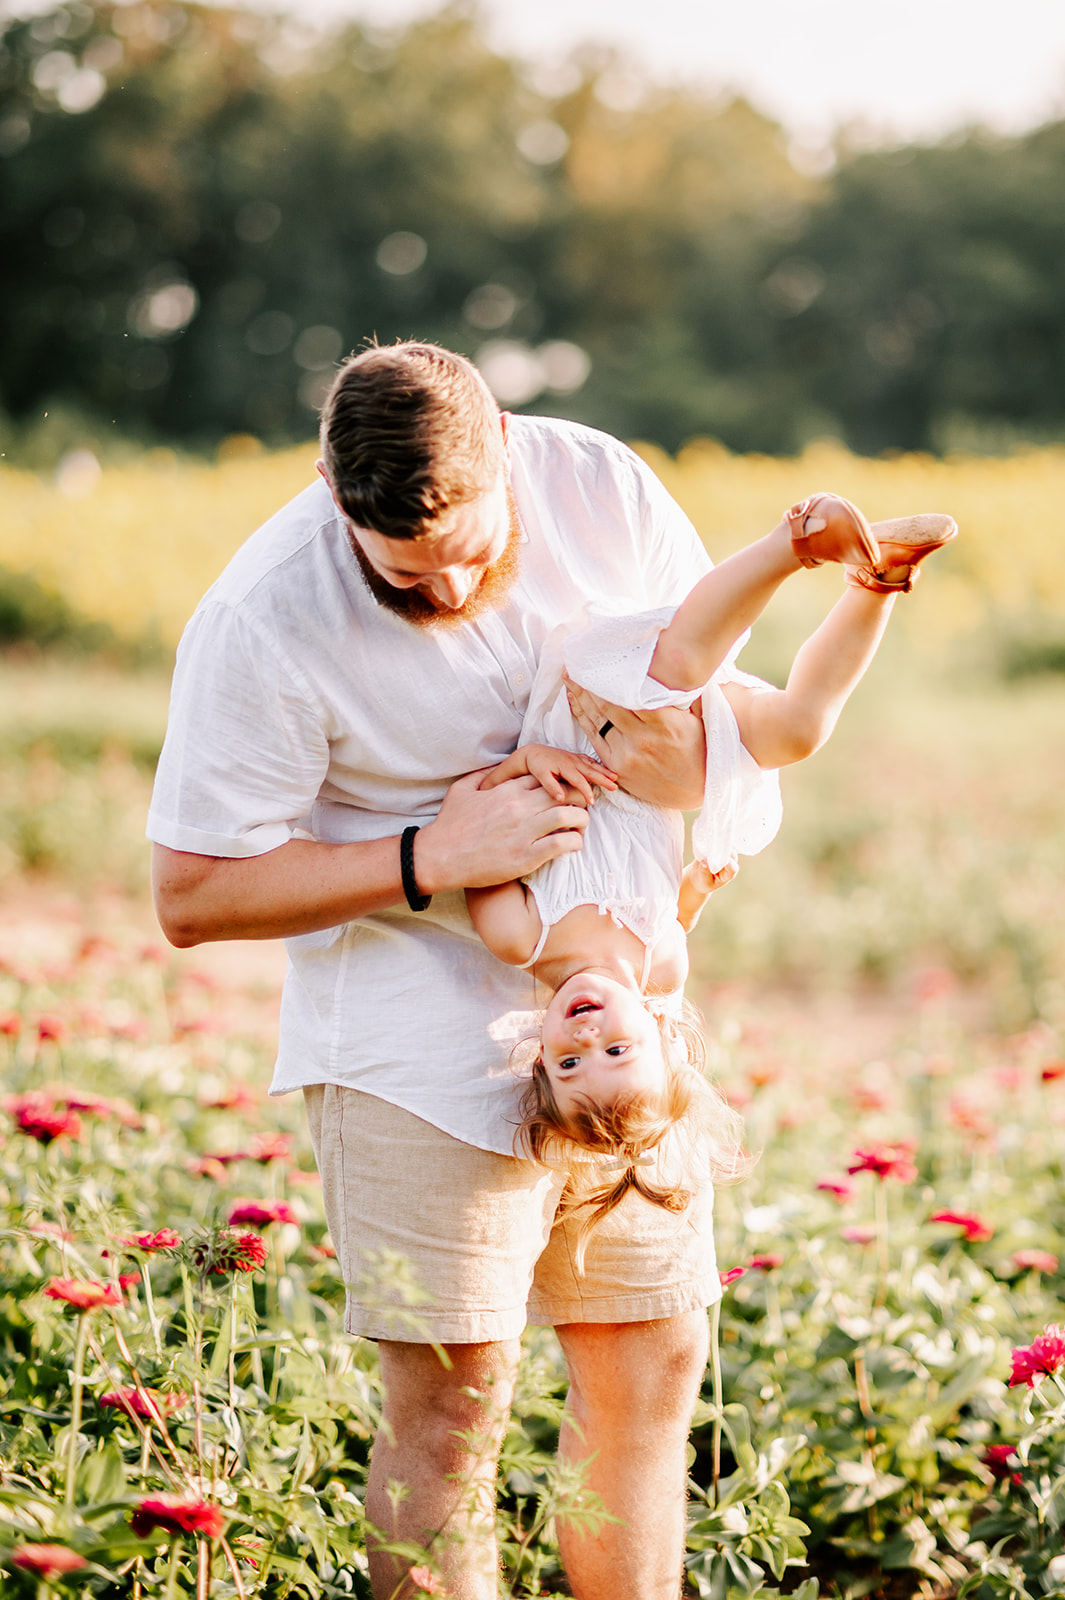 A dad flips his toddler daughter upside down as they play in a field of flowers